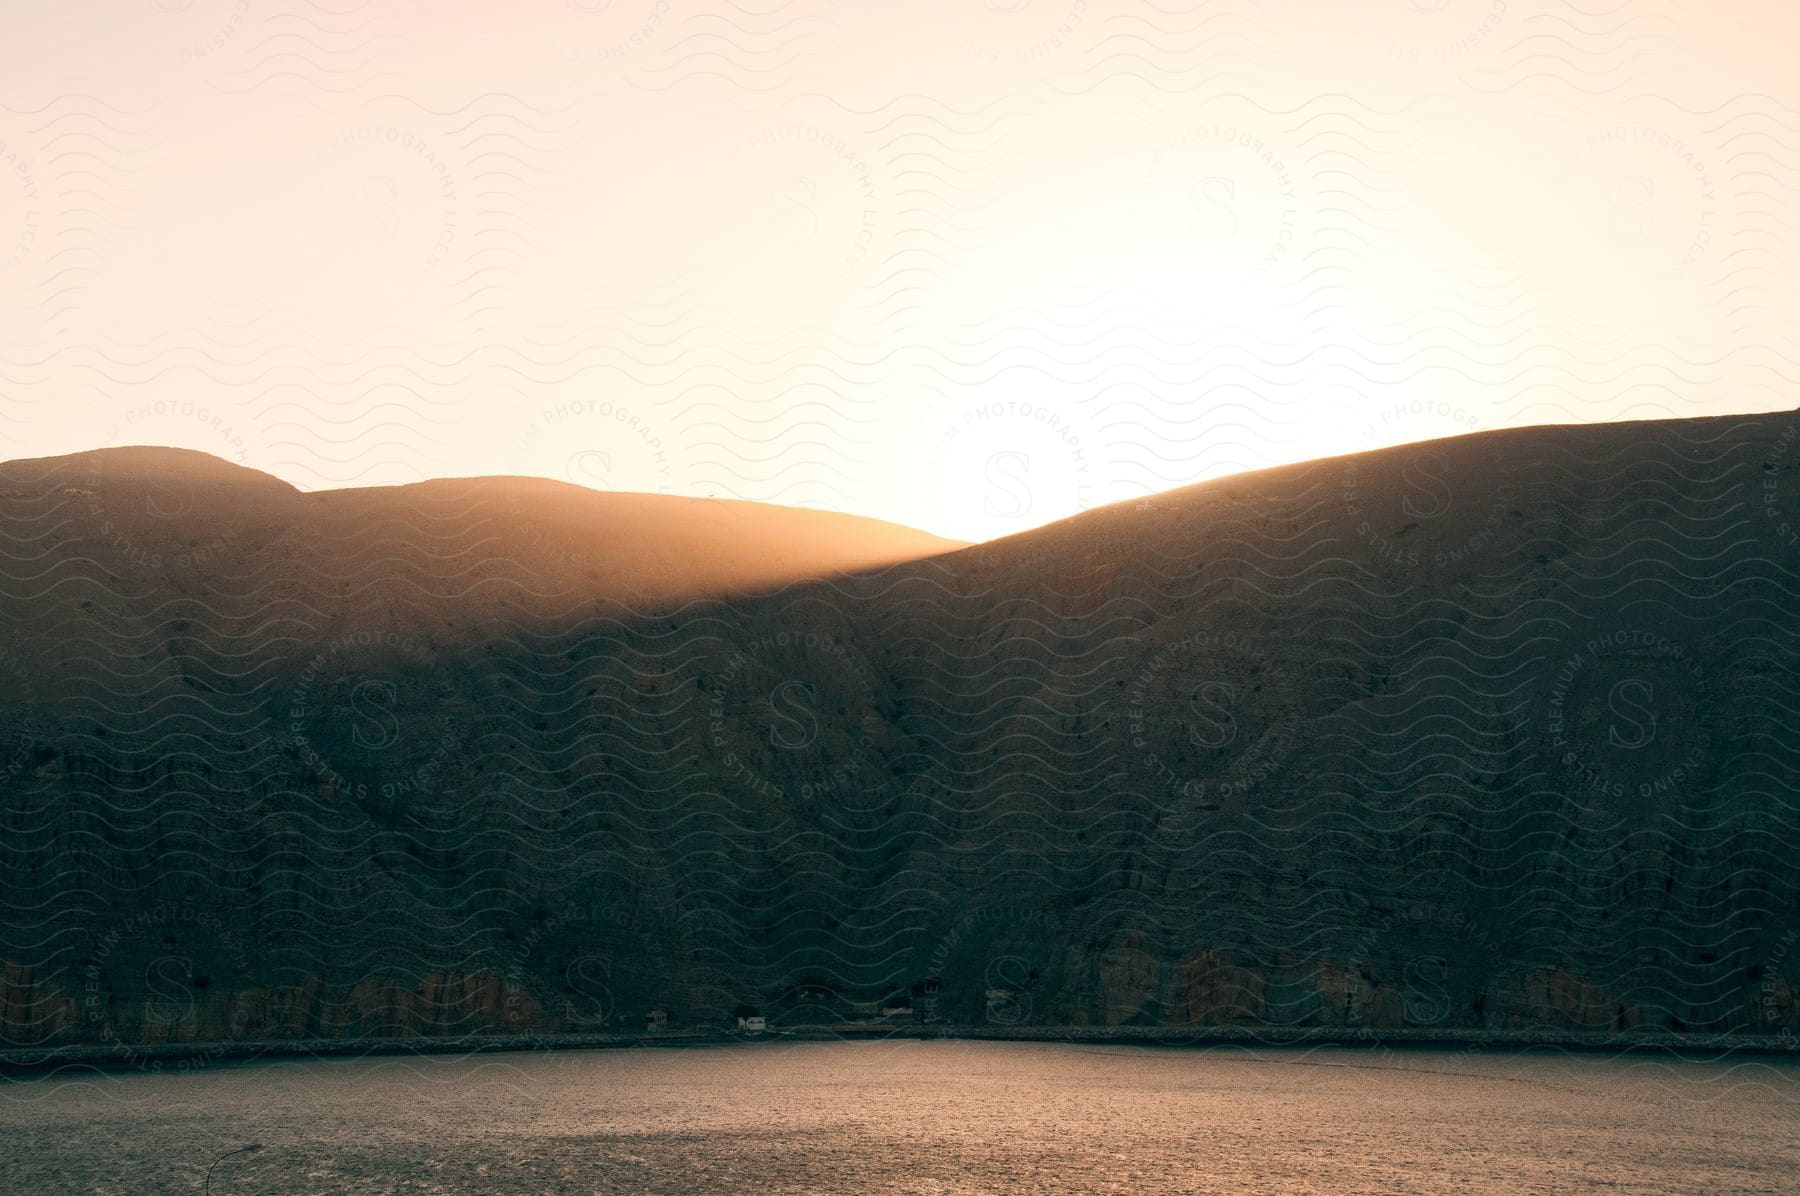 Sunlight bursts through a dip in a hillside next to a body of water